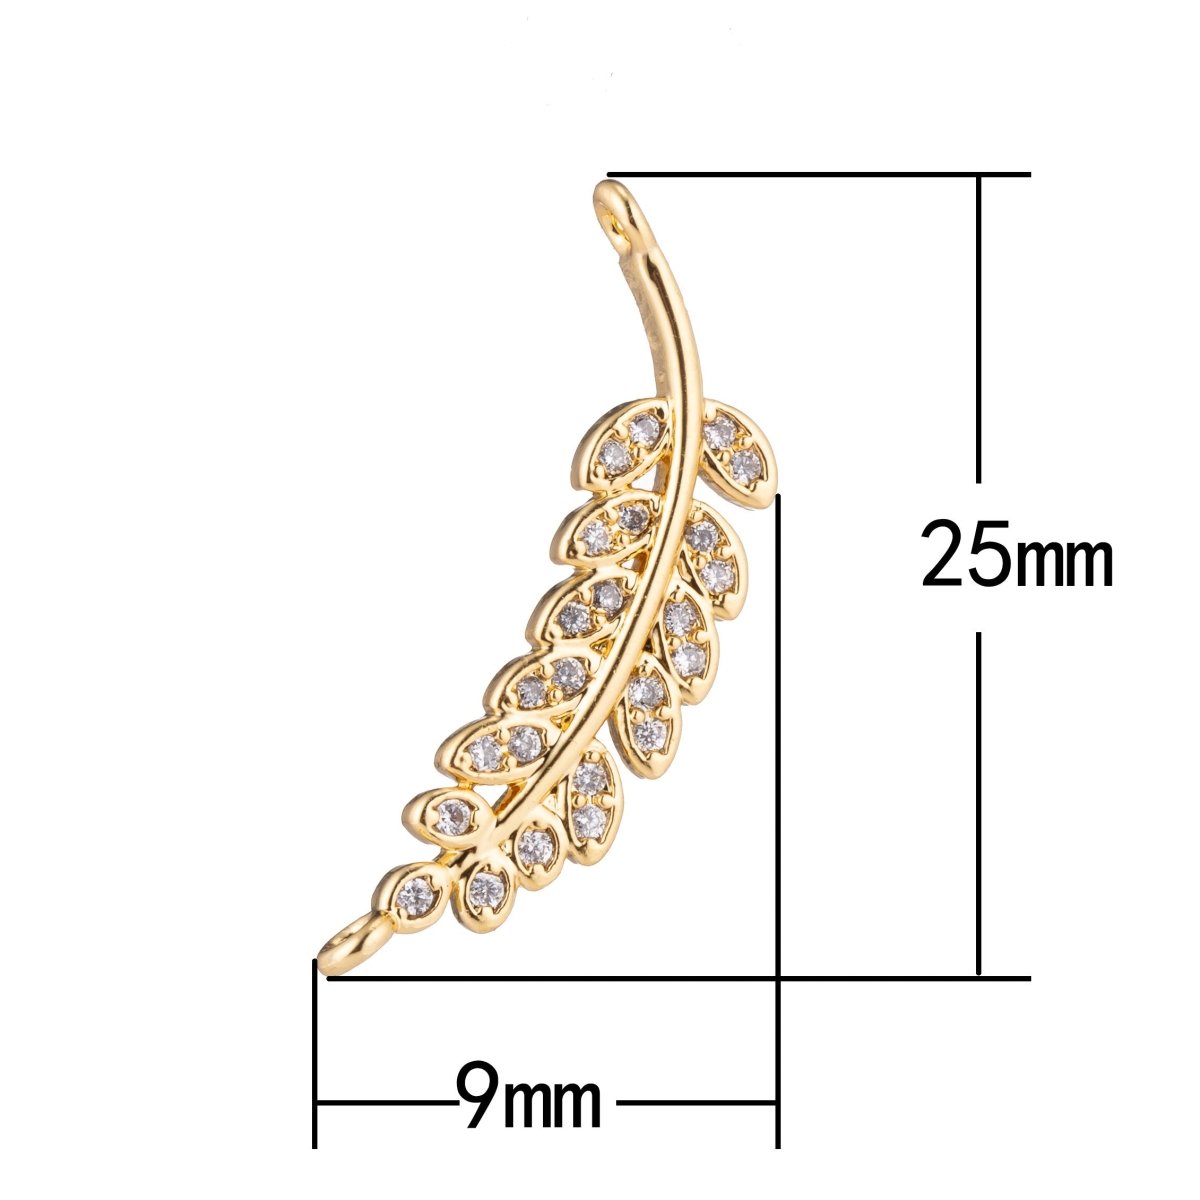 On Sale! CLEARANCE! Gold Filled Leaf, Tree Branch, Flower, Foliage, Cubic Zirconia Bracelet CONNECTOR Charm, Necklace Pendant, Findings for Jewelry Making F-166 - DLUXCA